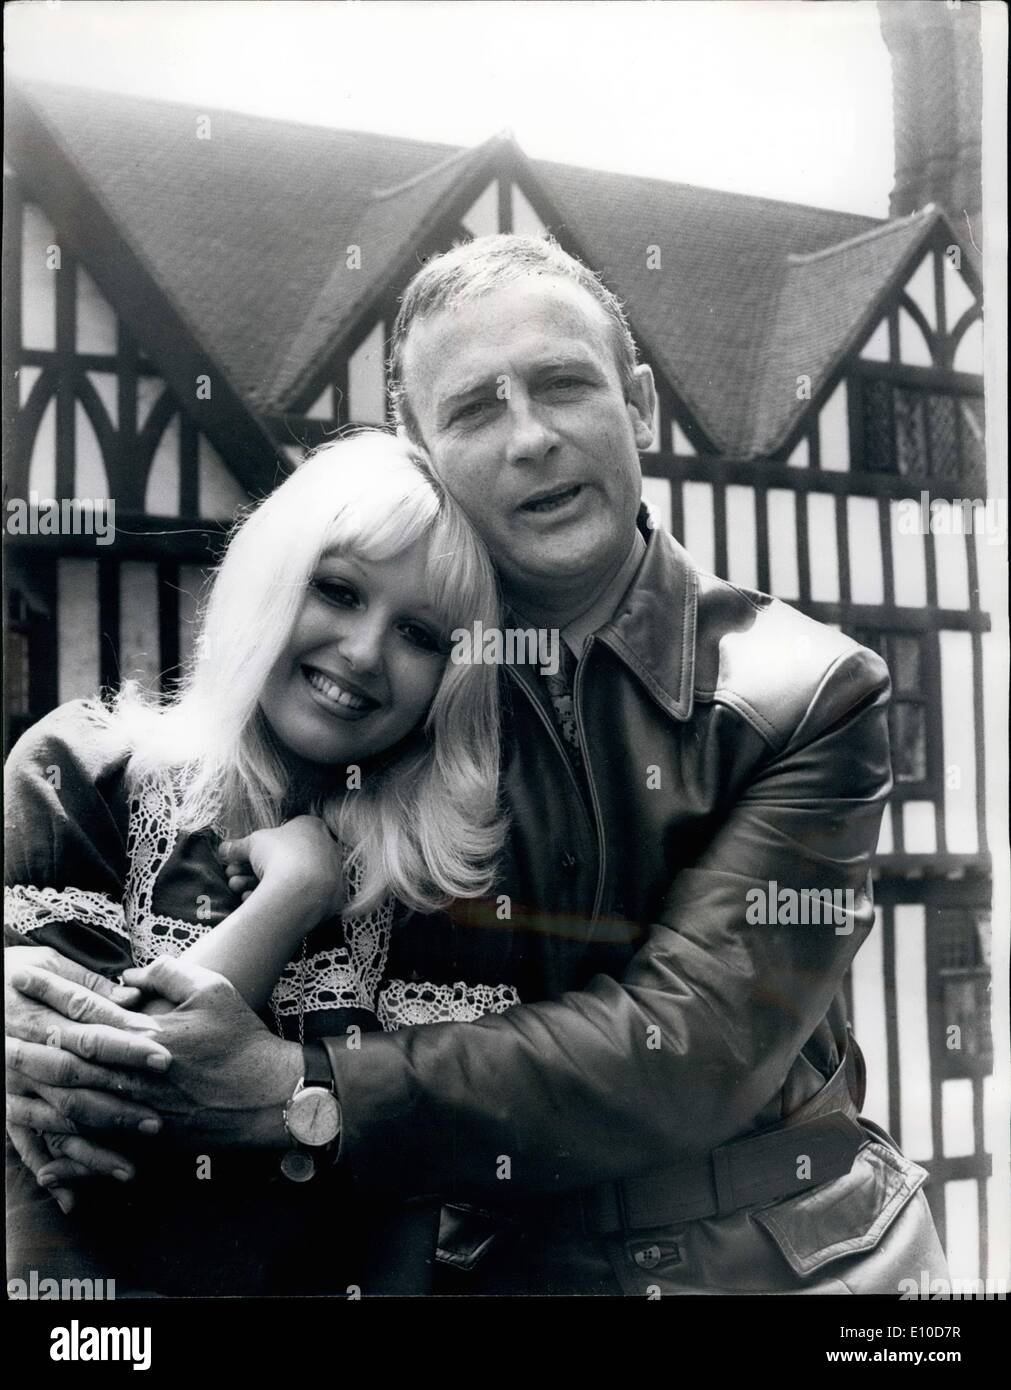 Jul. 07, 1972 - Edward Woodward to Appear in ''Babes in the Wood'' Pantomime: Edward Woodward, TV's 'Callan', is to play Robin Hood in his first ever Palladium season, in the pantomime ''Babes in the Wood''. Adrienne Posta will play the part of Maid Marion. Keystone Photo Shows:- Edward Woodward pictured in London yesterday with Adrienne Posta. They both have leading roles in the London Palladium pantomime ''Babes in the Wood' Stock Photo